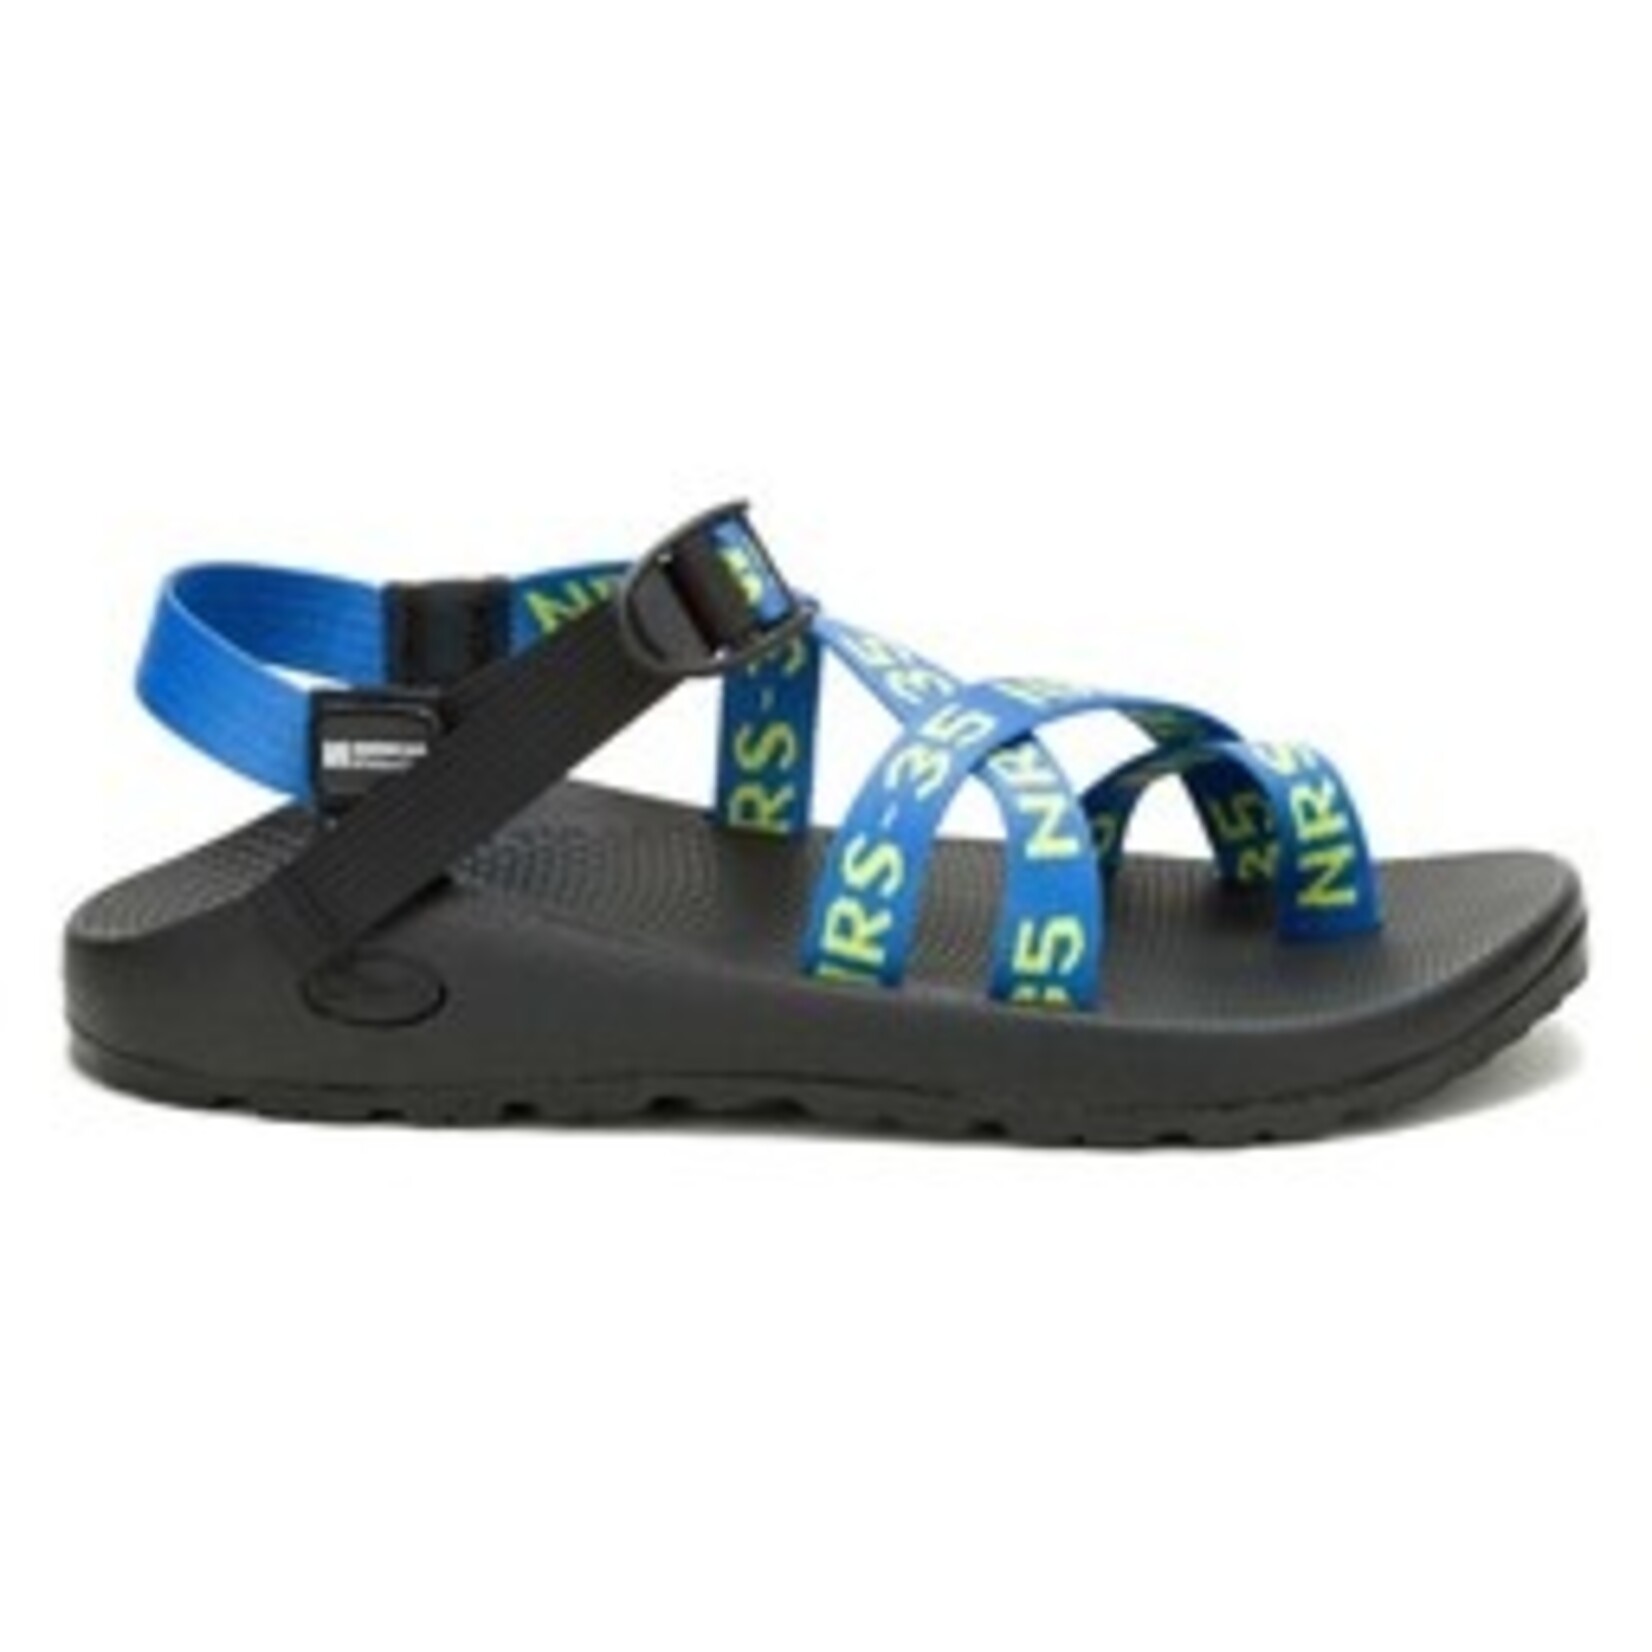 Chaco NRS + Chaco Men's Z/2 Classic Sandals